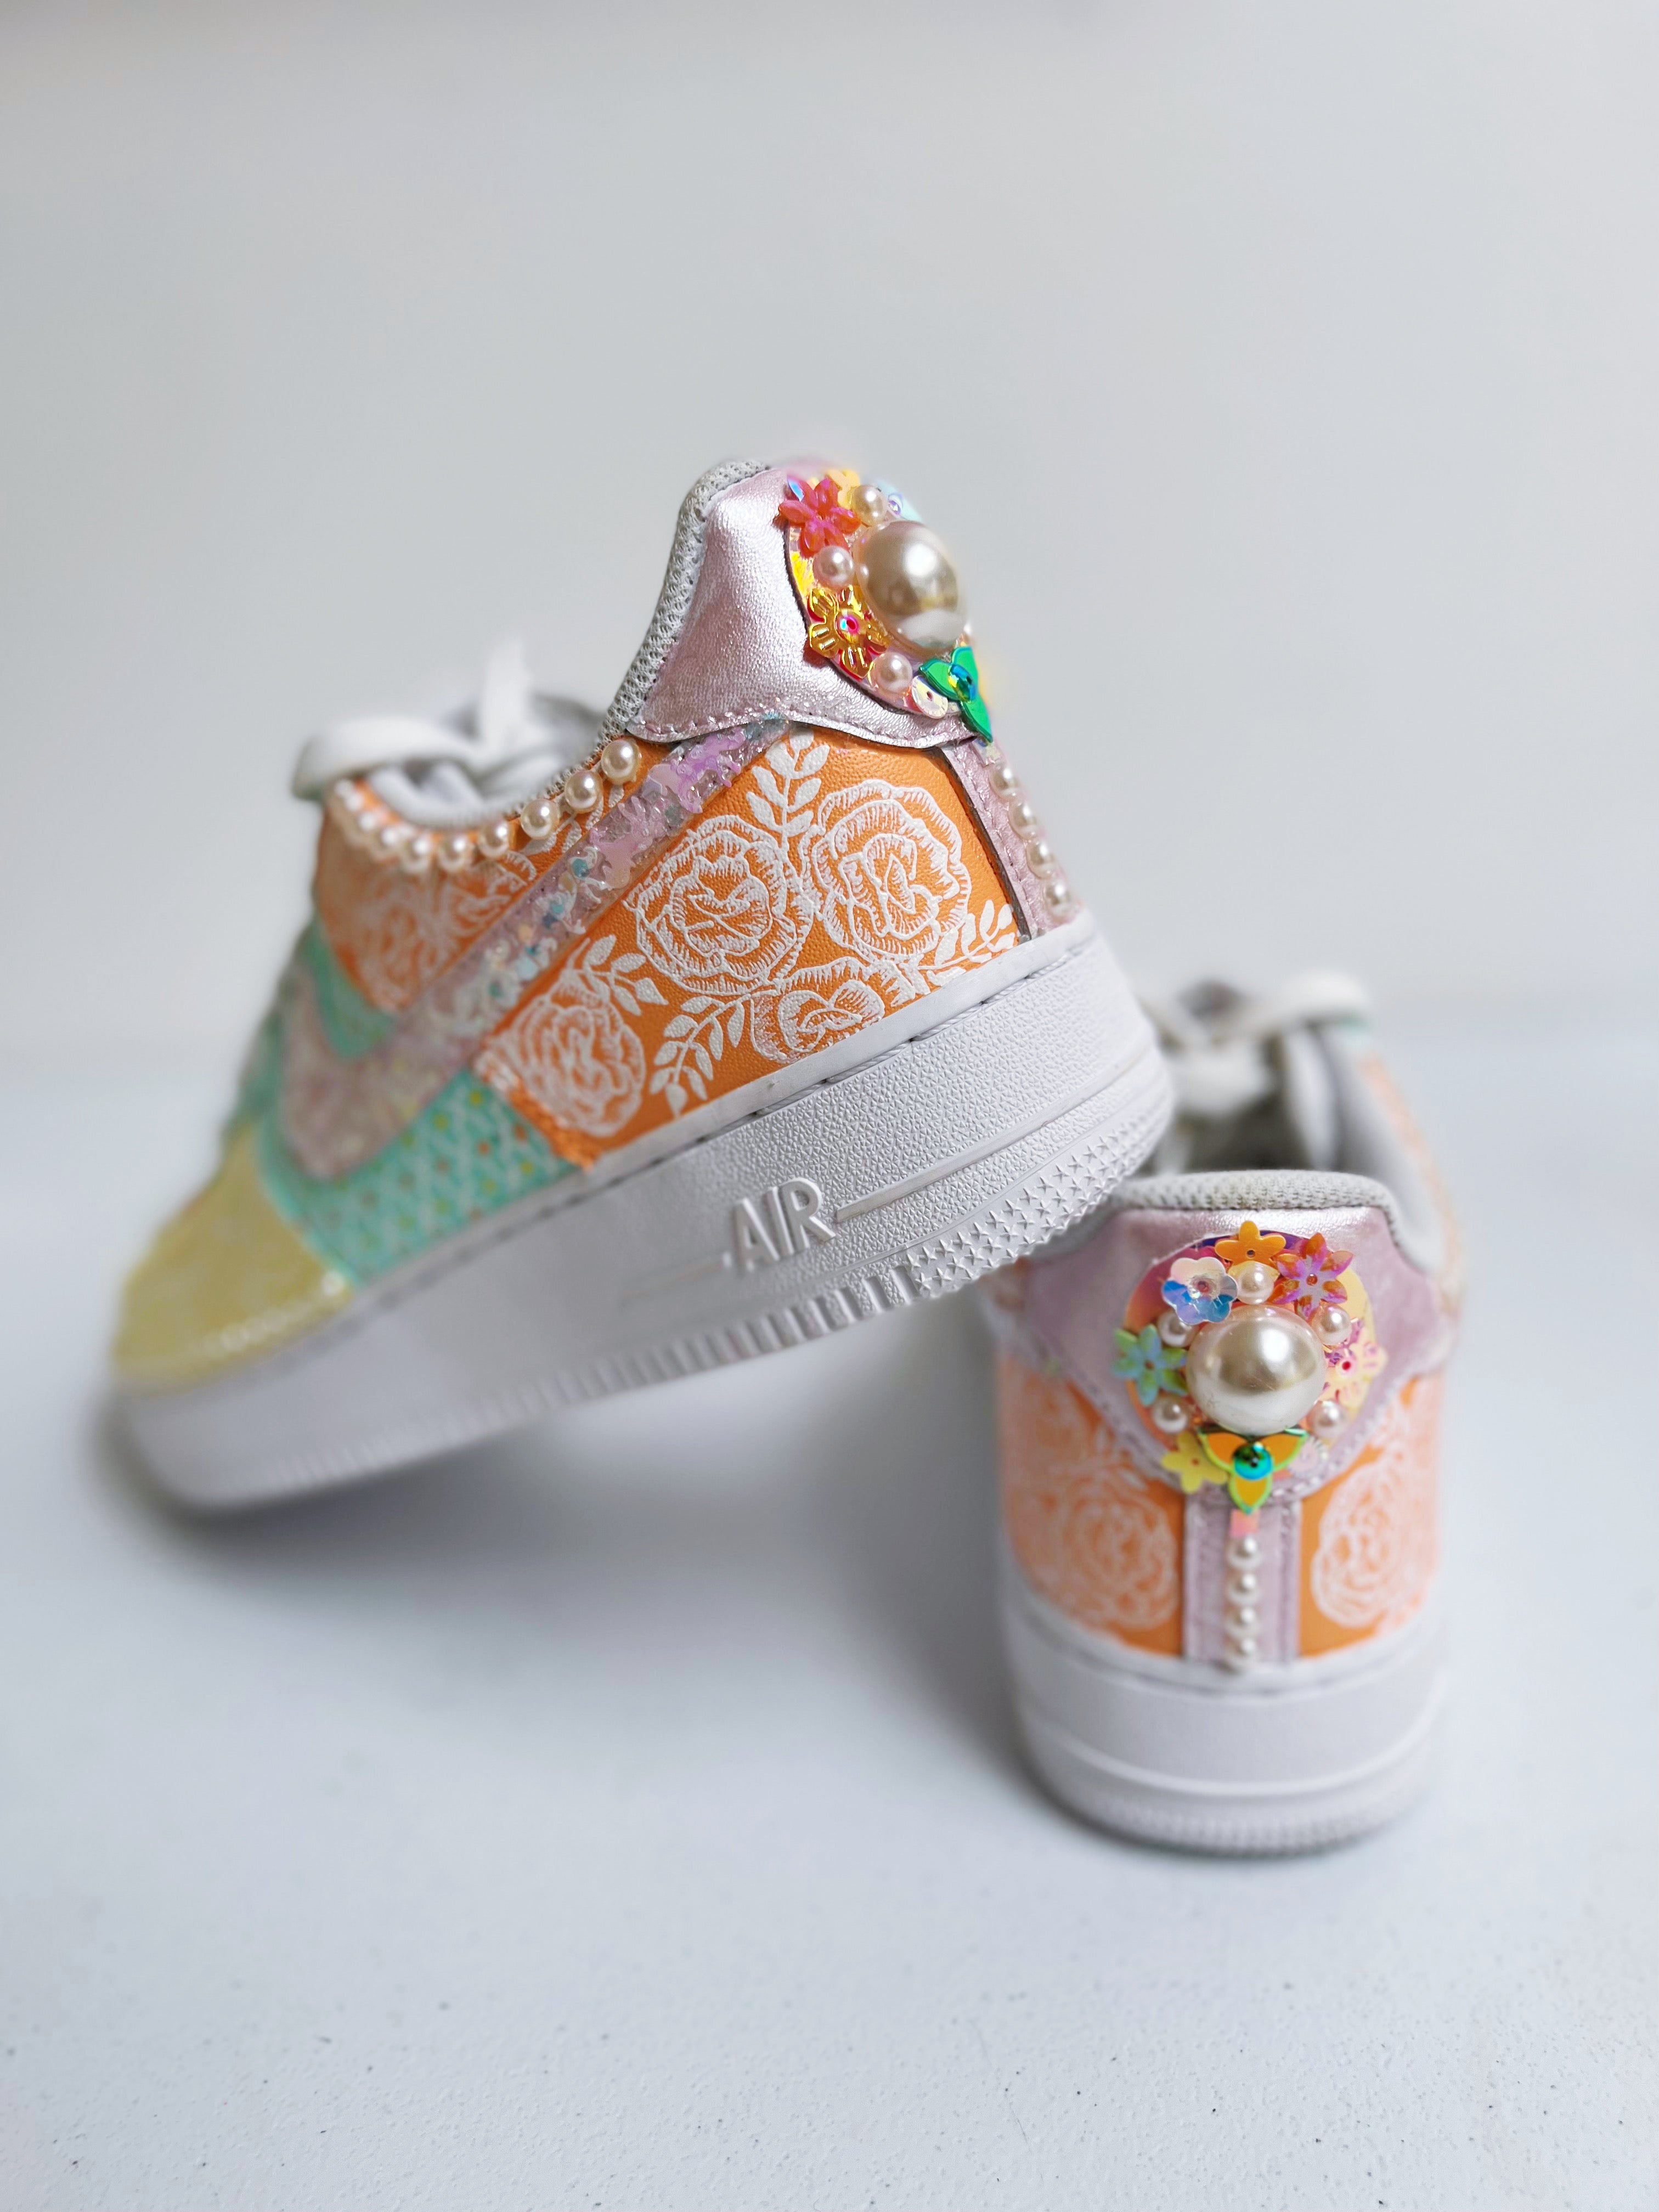 "Devi" Hand Painted and Embellished Nike AF1 '07, W 9.5 / M 8